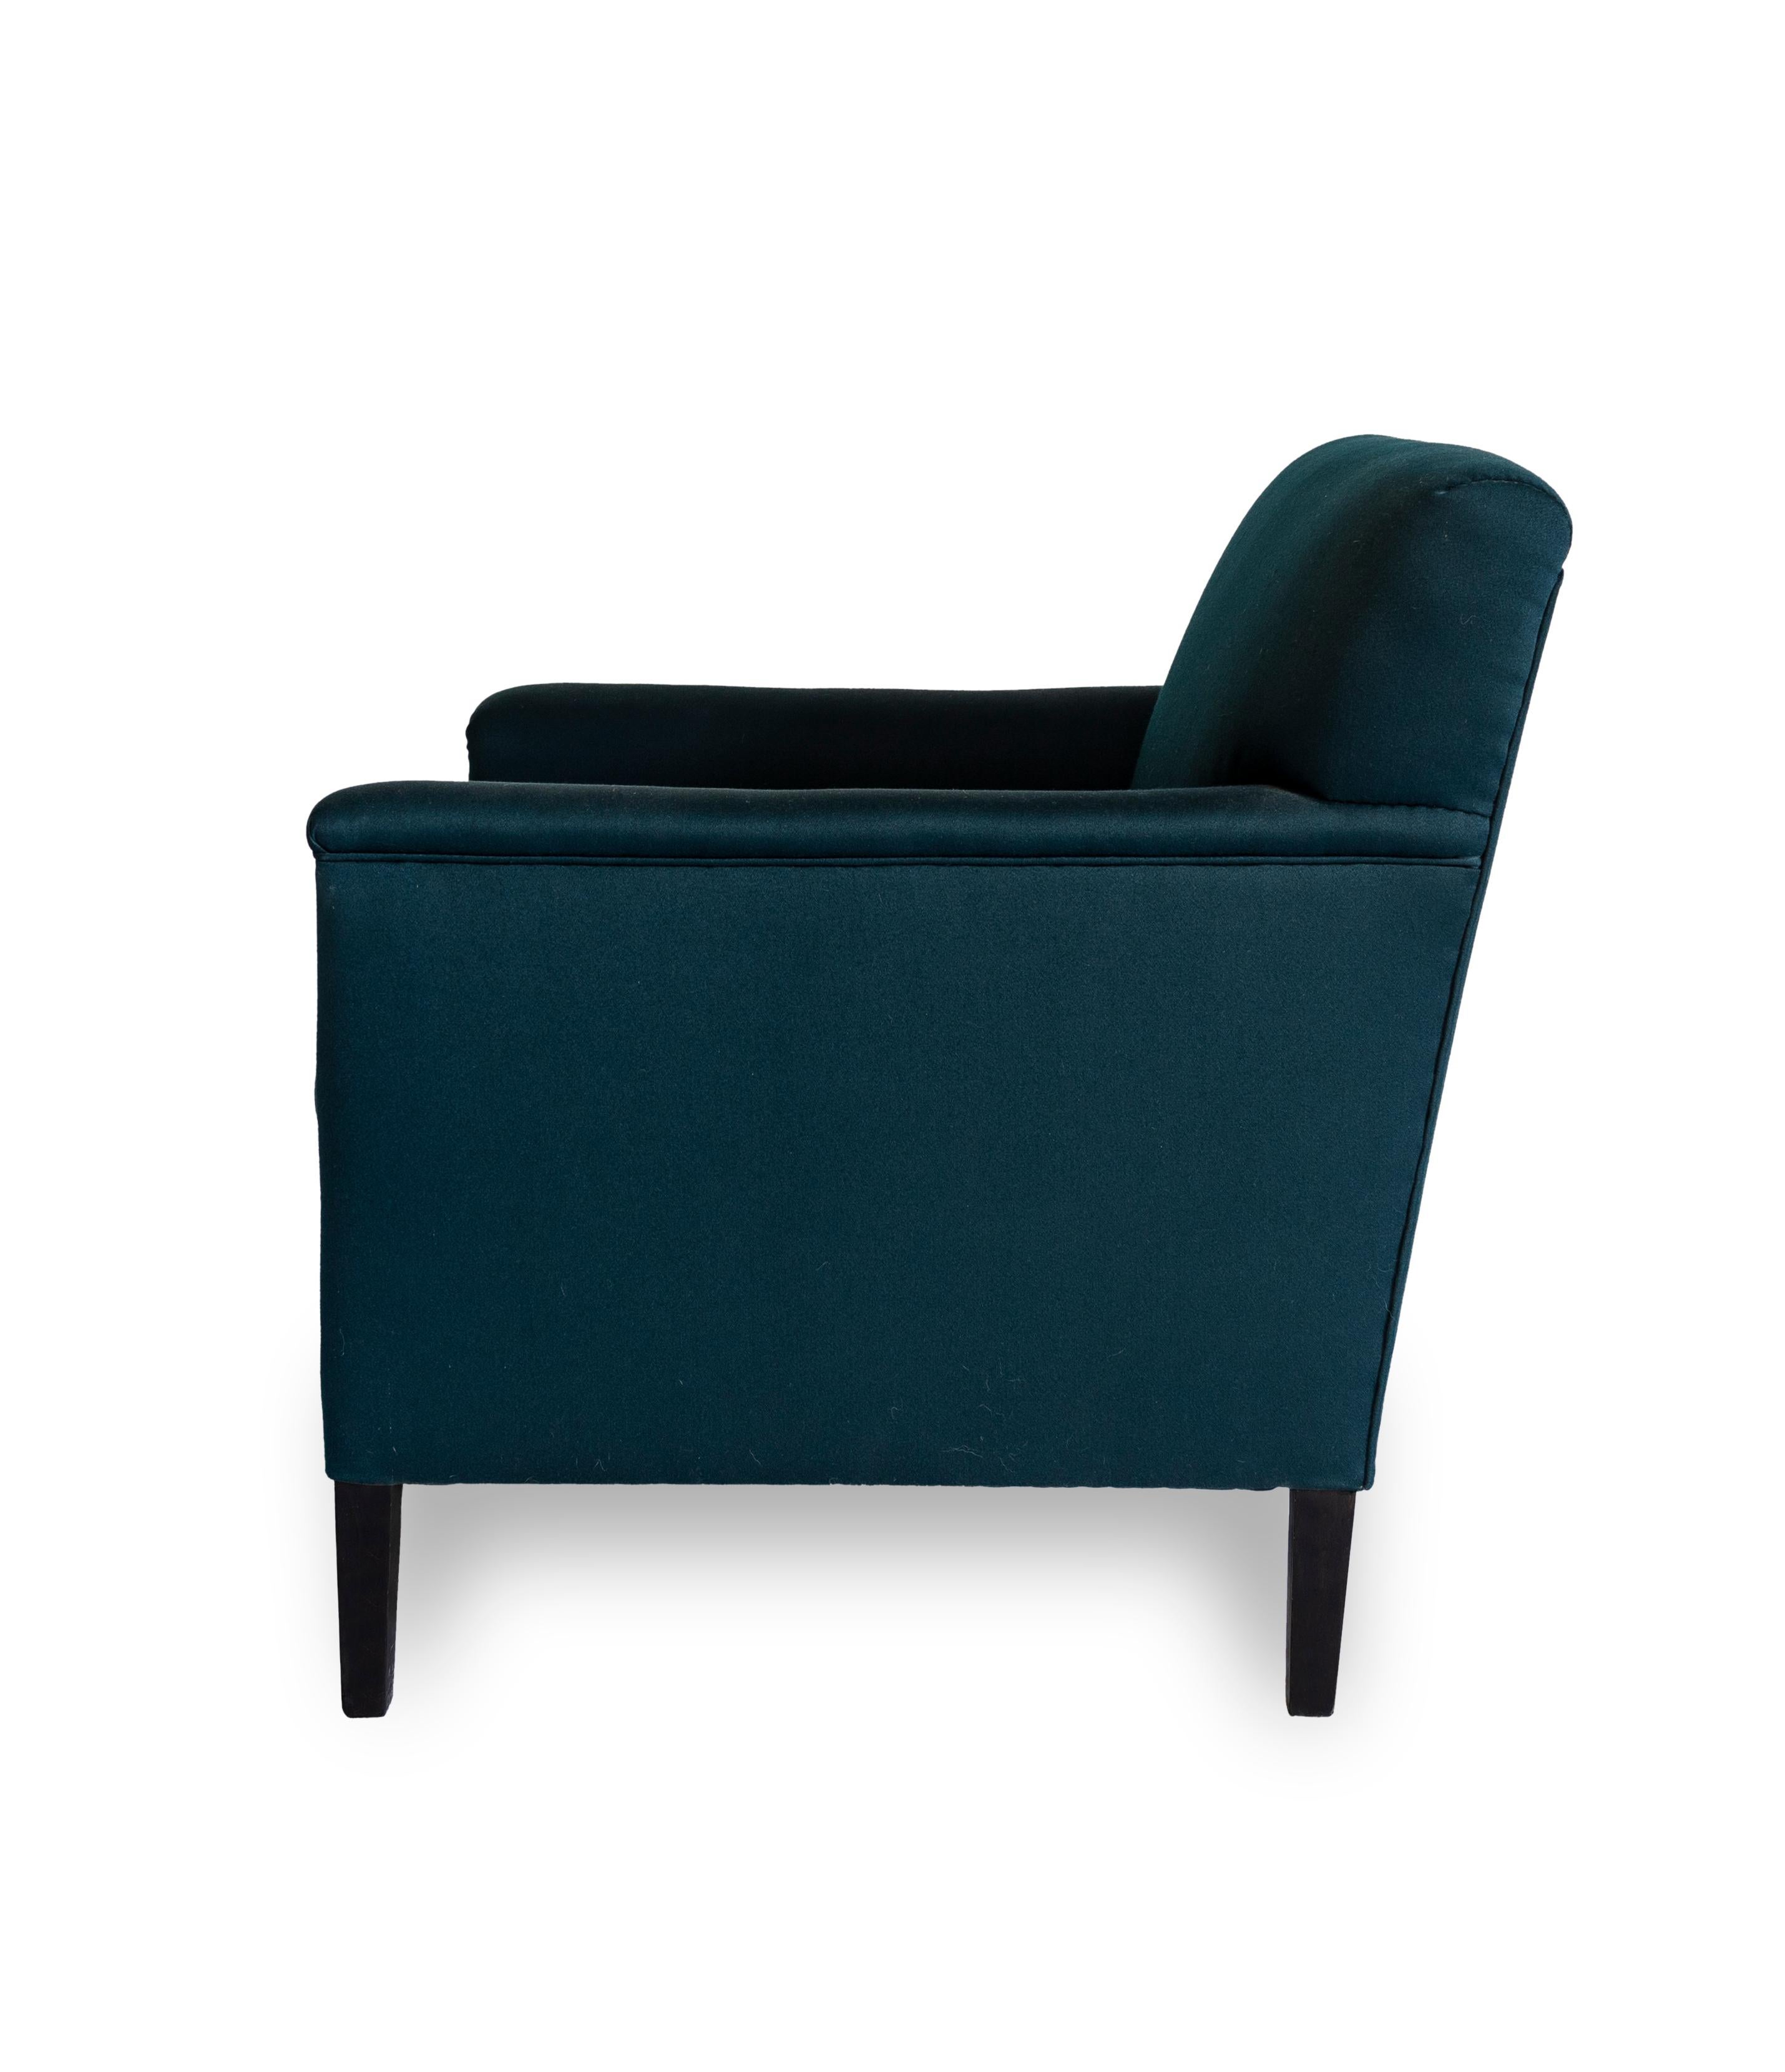 American Herbert Upholstered Chair in Wool, Vica designed by Annabelle Selldorf